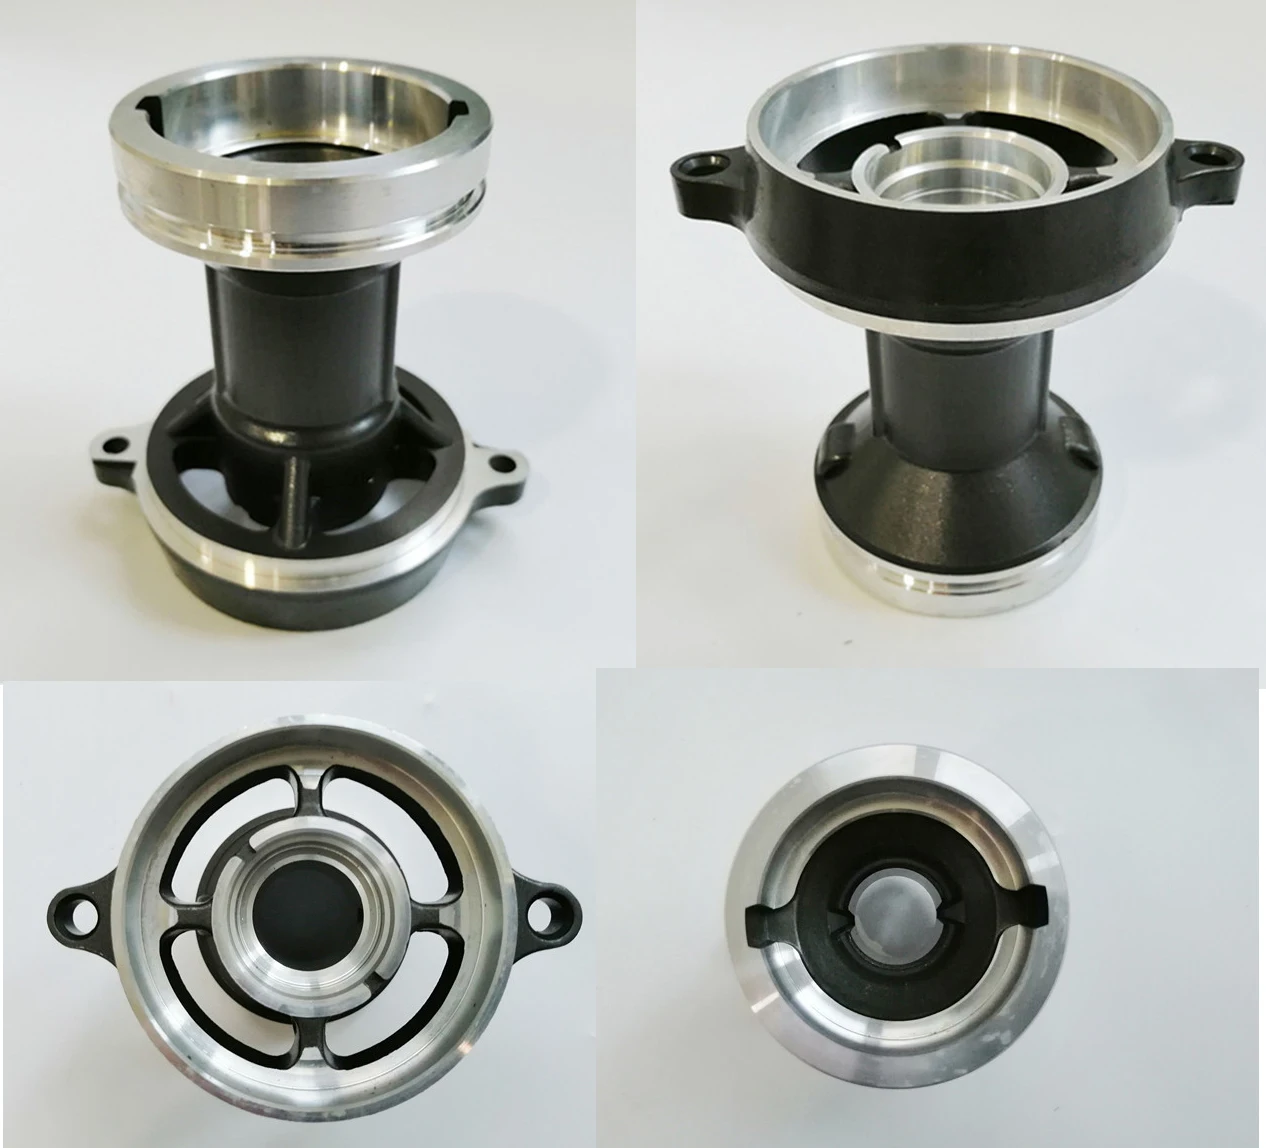 Propeller Shaft Housing Cap CASING fit Tohatsu NS M 9.9HP, 15HP, 18HP 2/4 stroke 36260101-0M for tohatsu nissan boat engine 2 4 stroke 9 9hp 15hp 18hp 362q60101 outboard motor 362q60101 1 propeller shaft housing